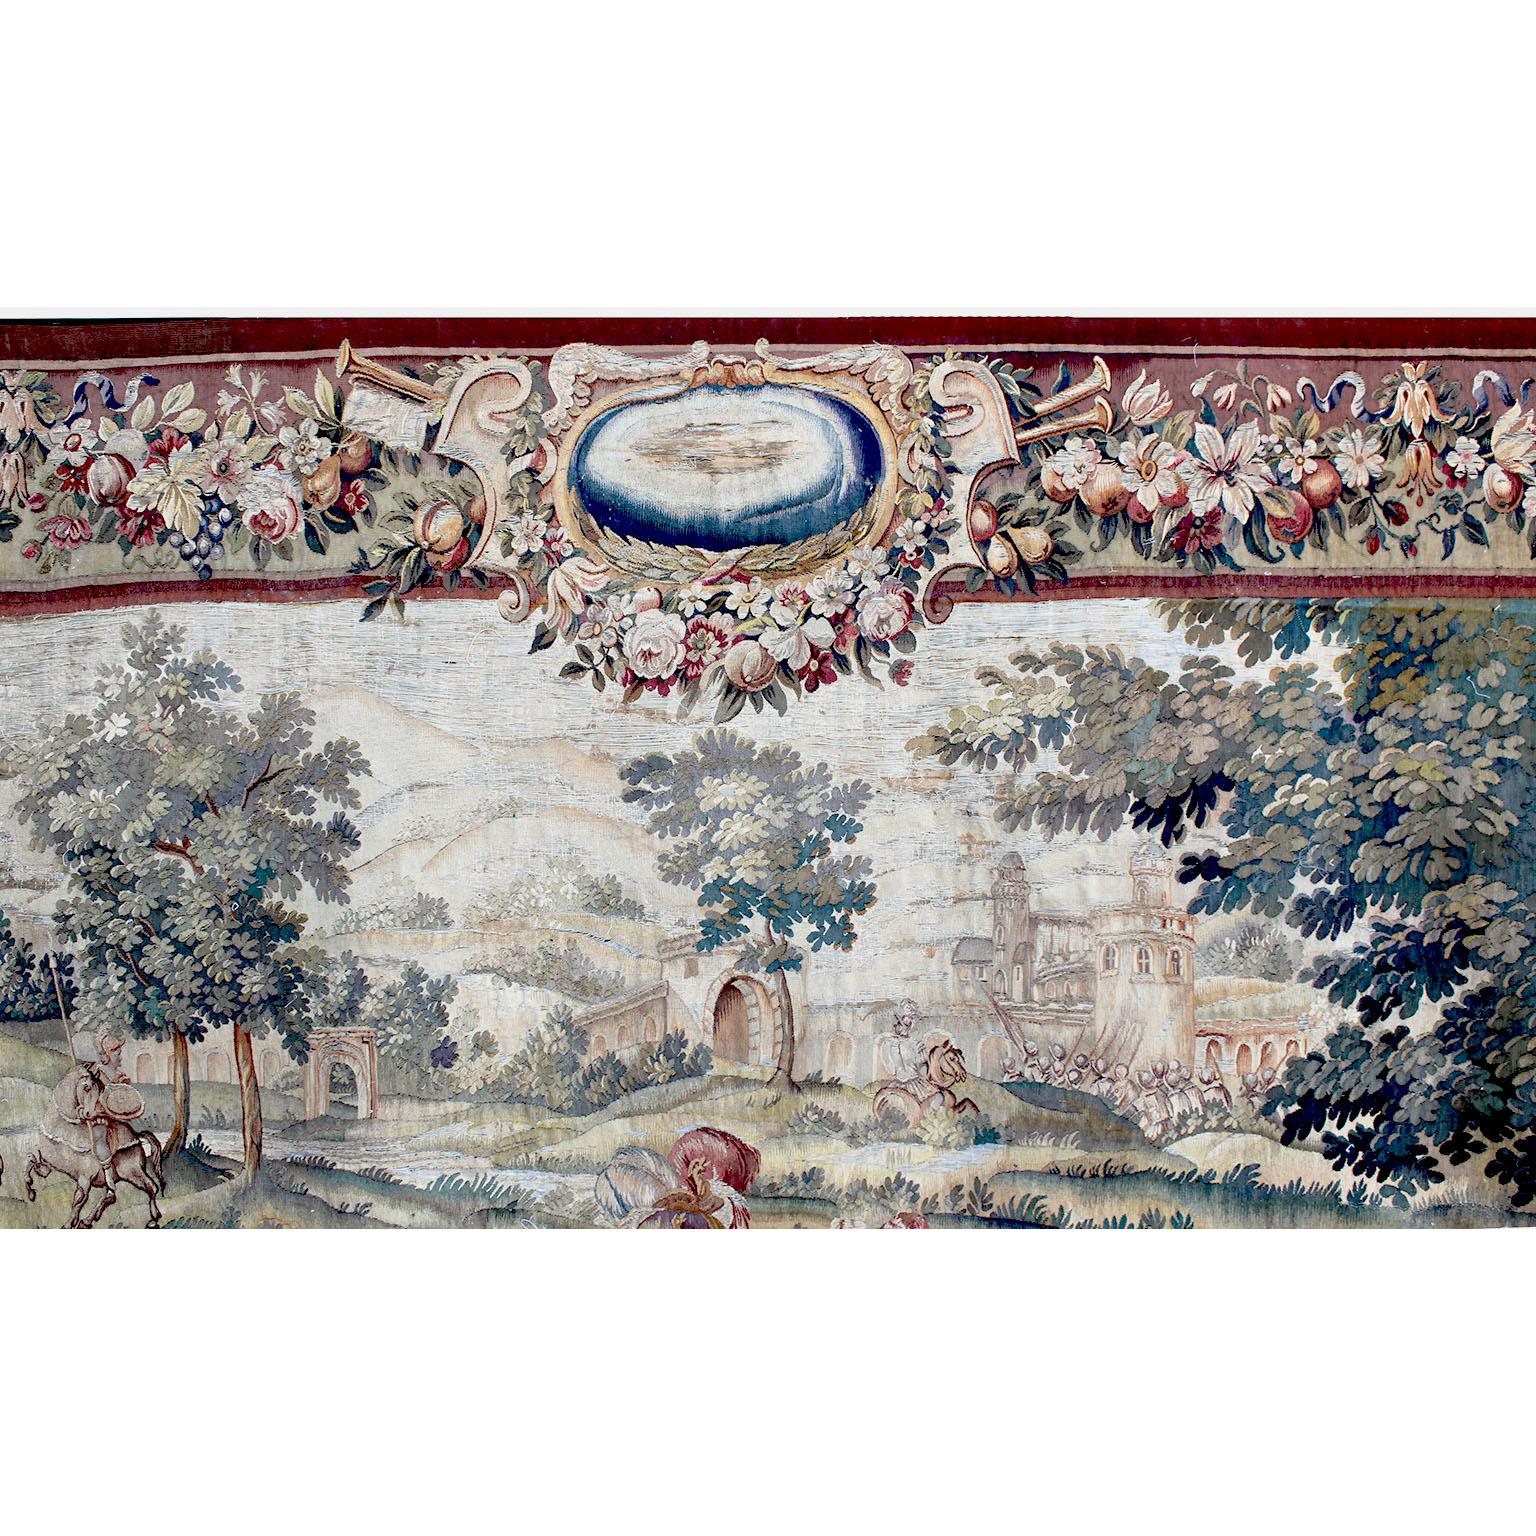 Flemish 17th-18th Century Baroque Historical Tapestry Fragment 